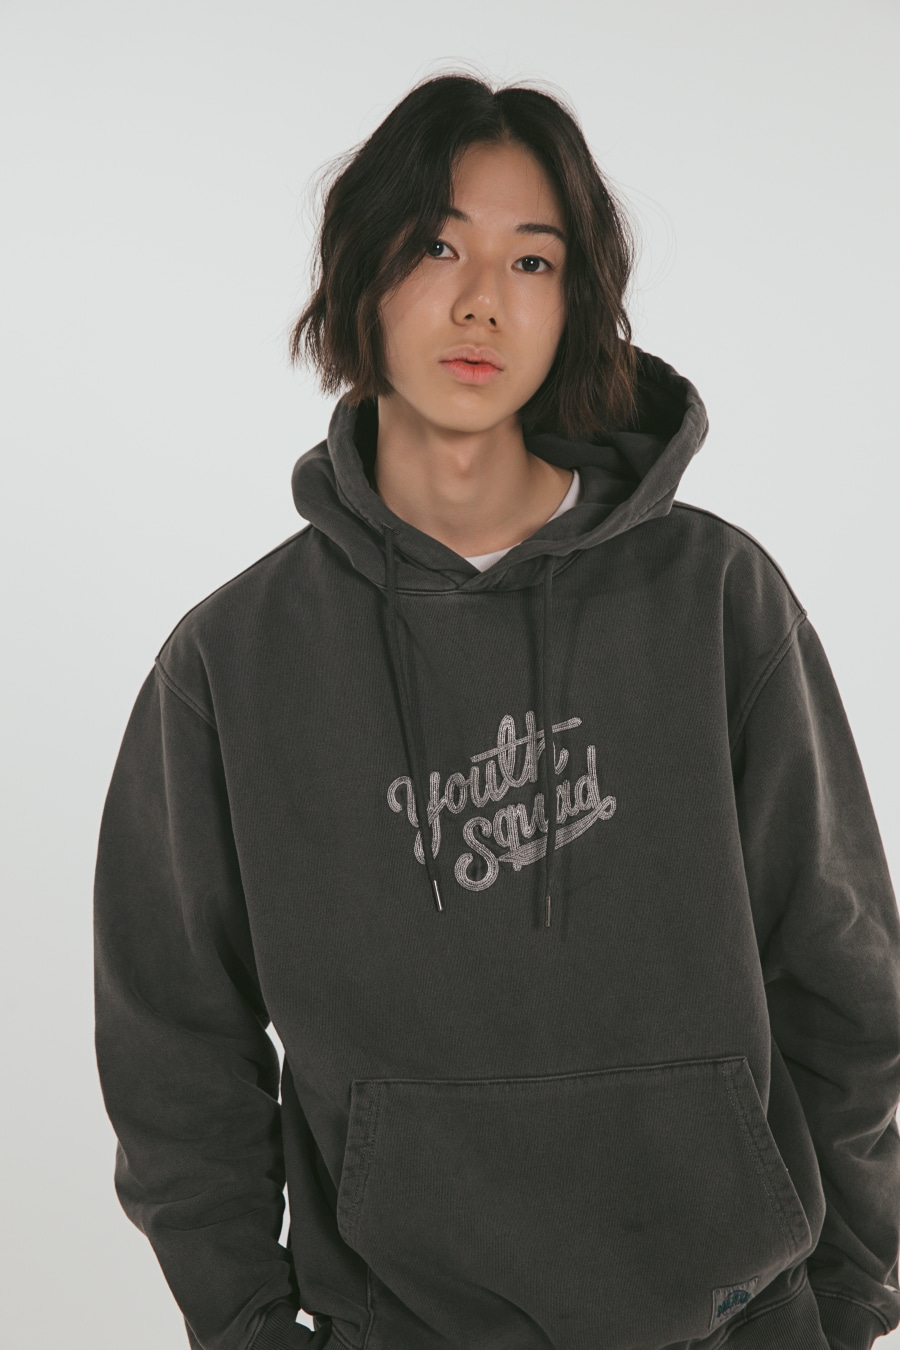 Youth squad Pigment Hoodie Gray